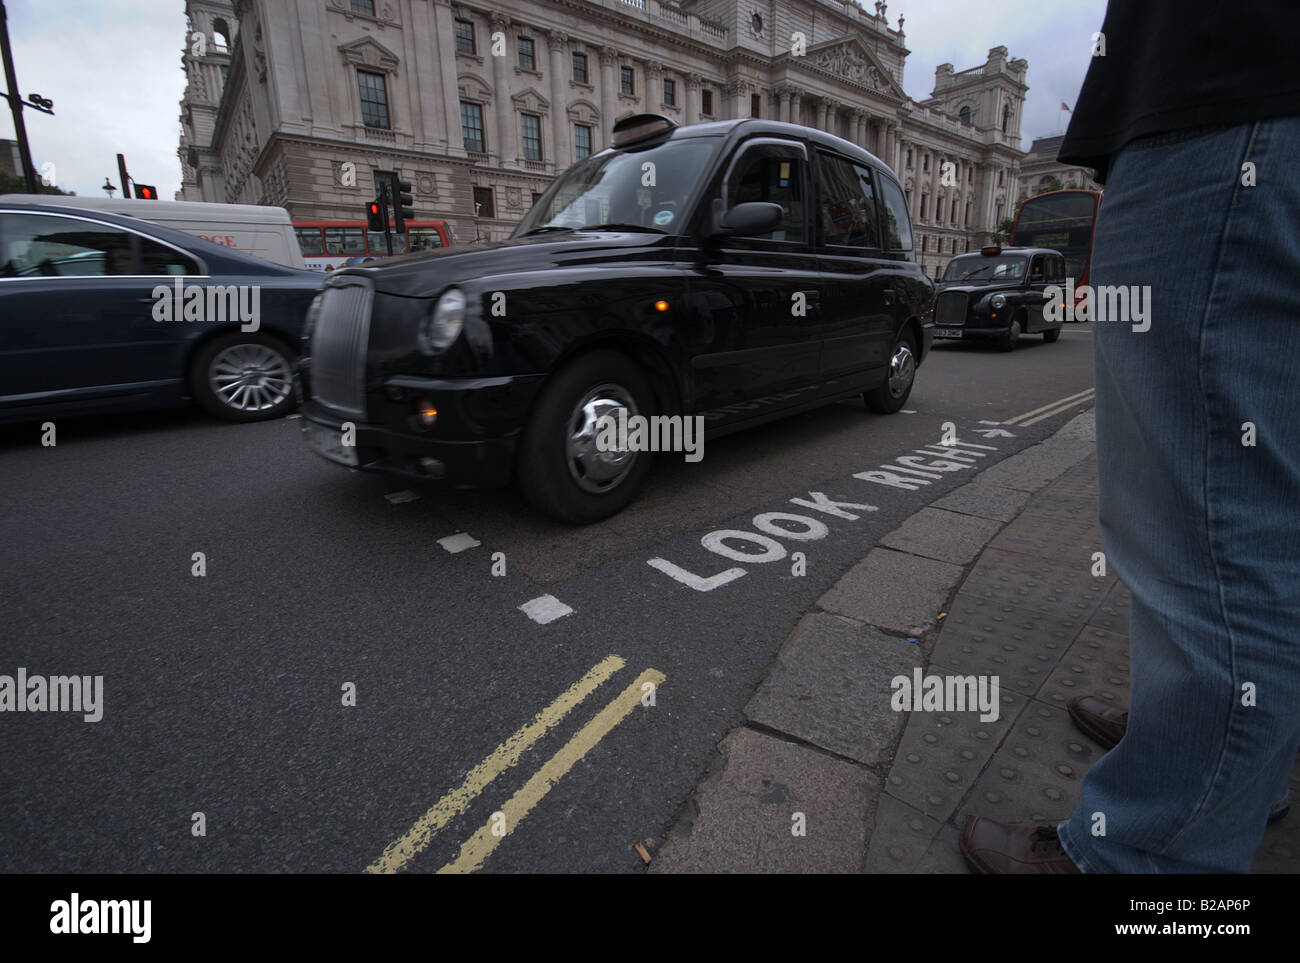 A black taxi cab driving past a pedestrian crossing. Stock Photo